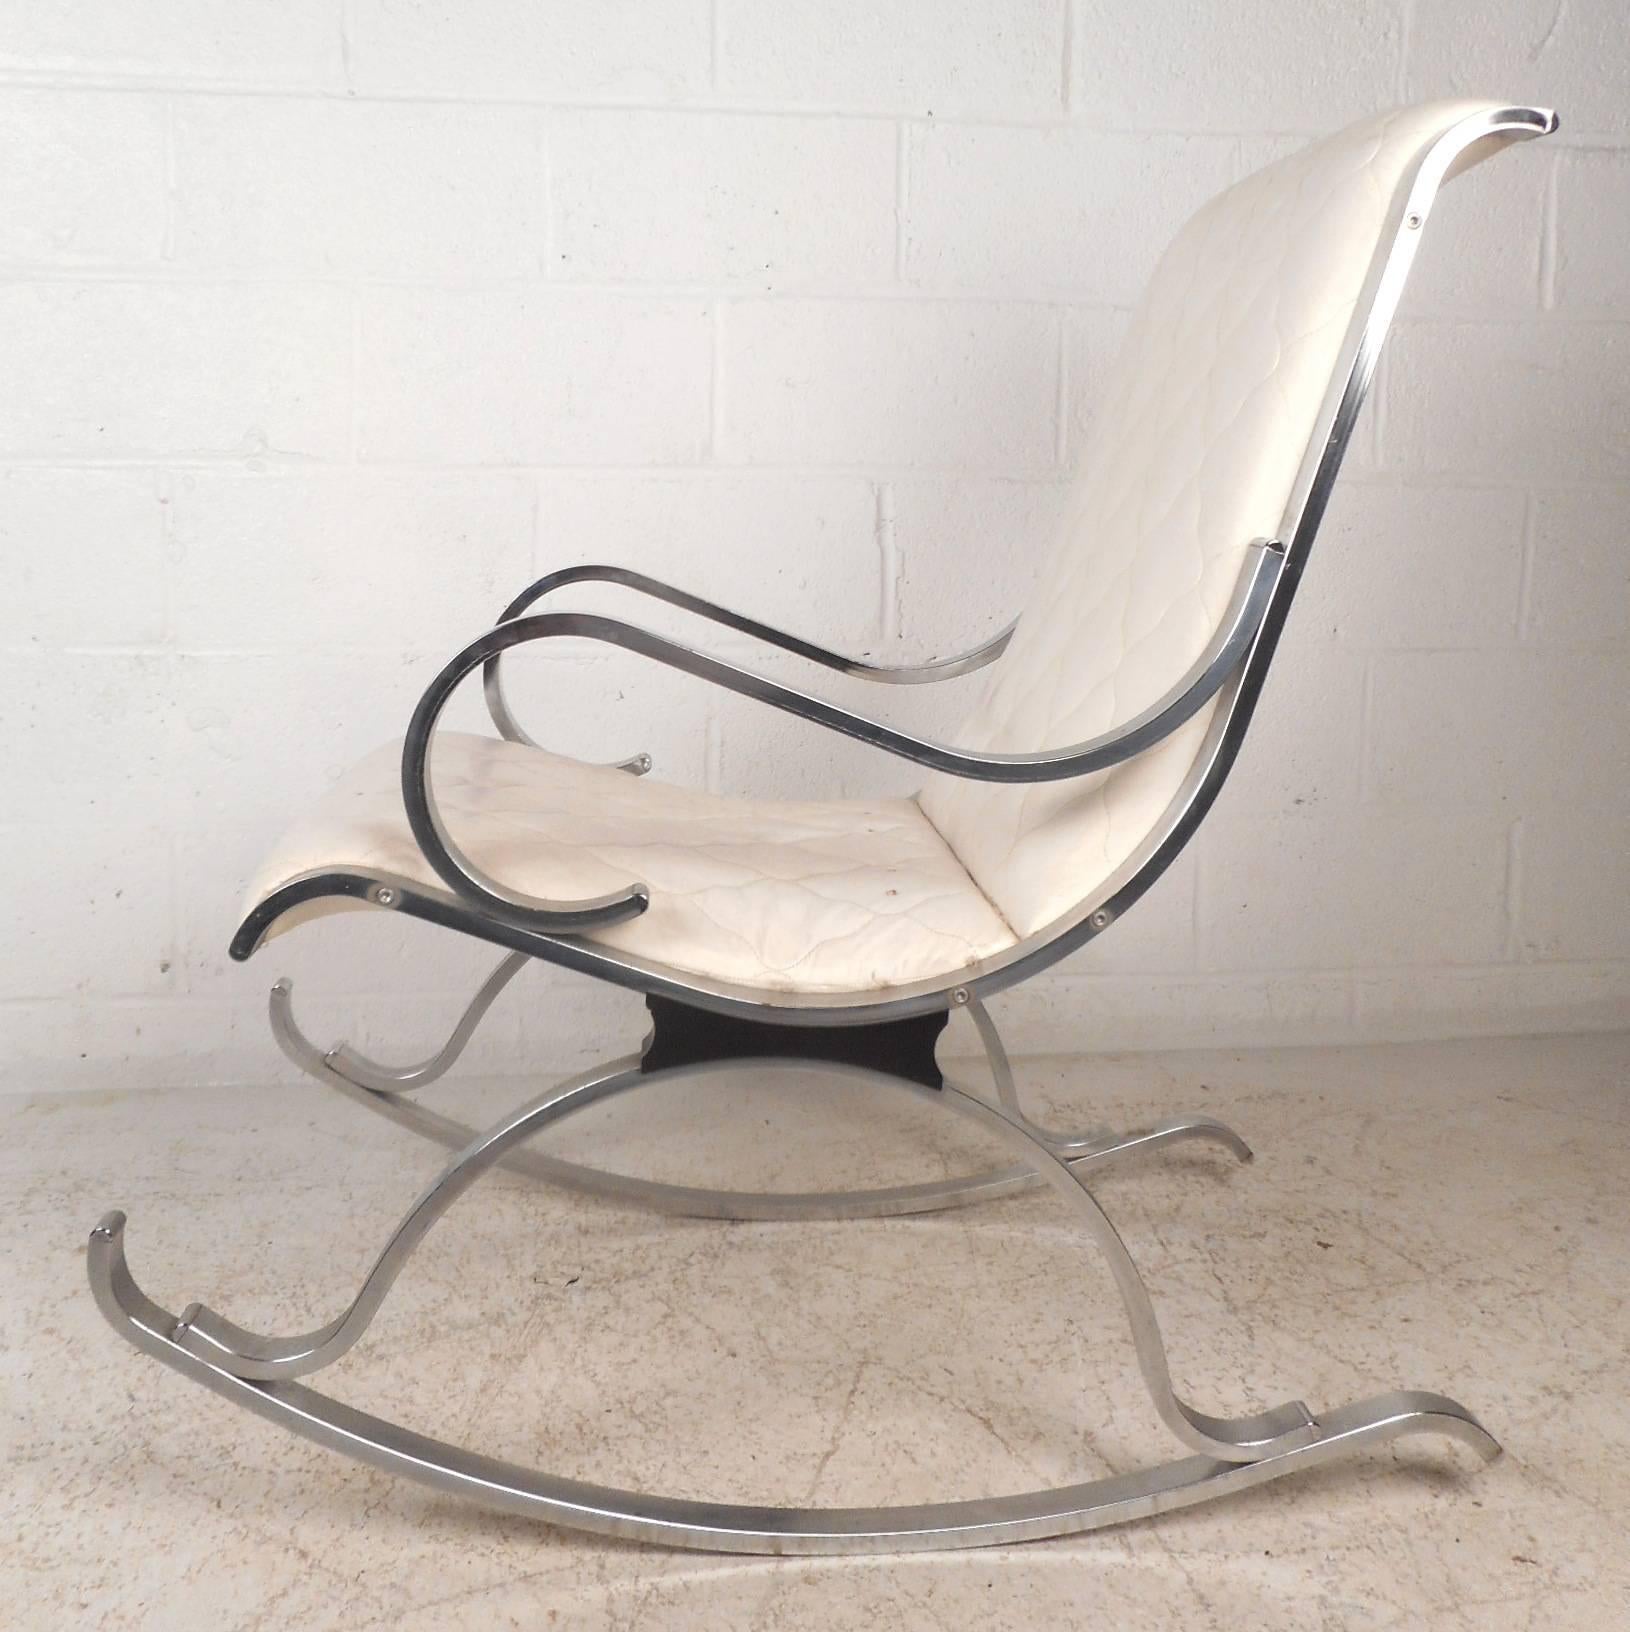 This lovely vintage modern rocking chair features a unique sculpted bent chrome frame and white leather upholstery. This unique rocker has perfectly placed arm rests for optimal comfort. The elegant white leather seating and heavy chrome base show